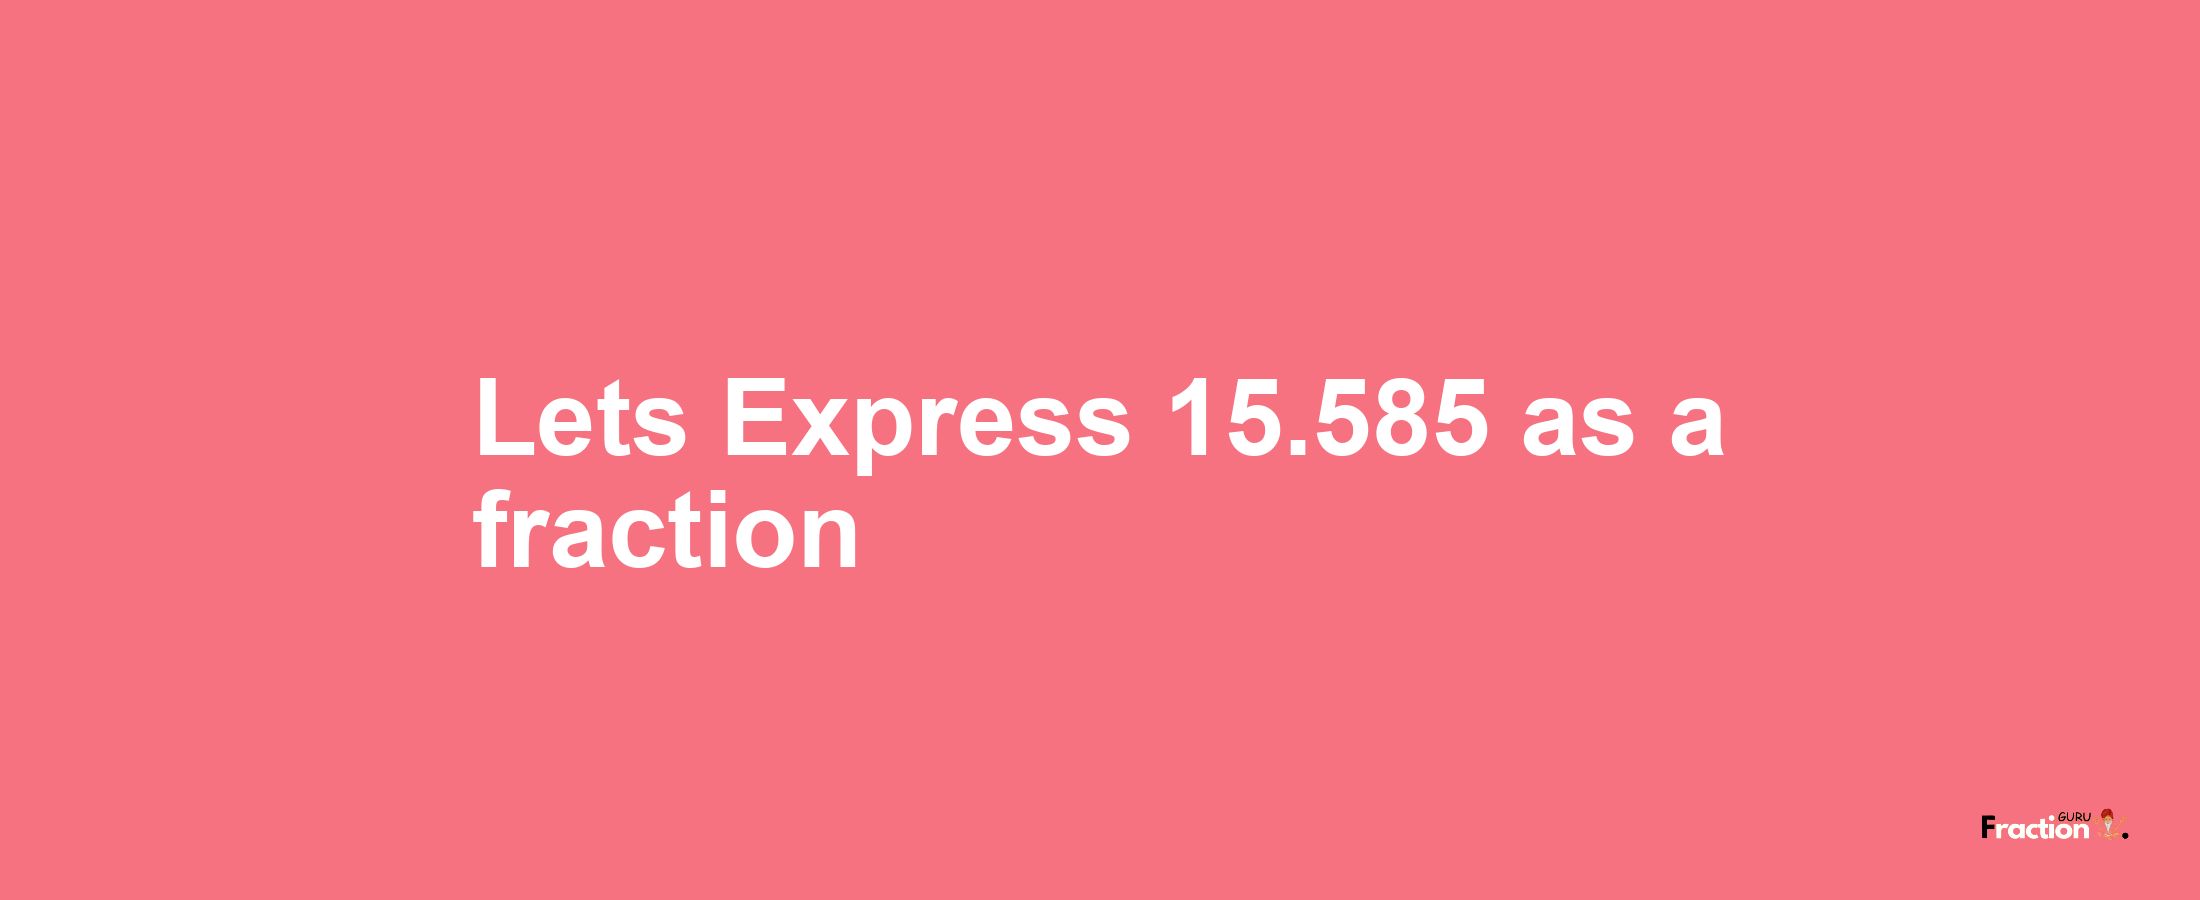 Lets Express 15.585 as afraction